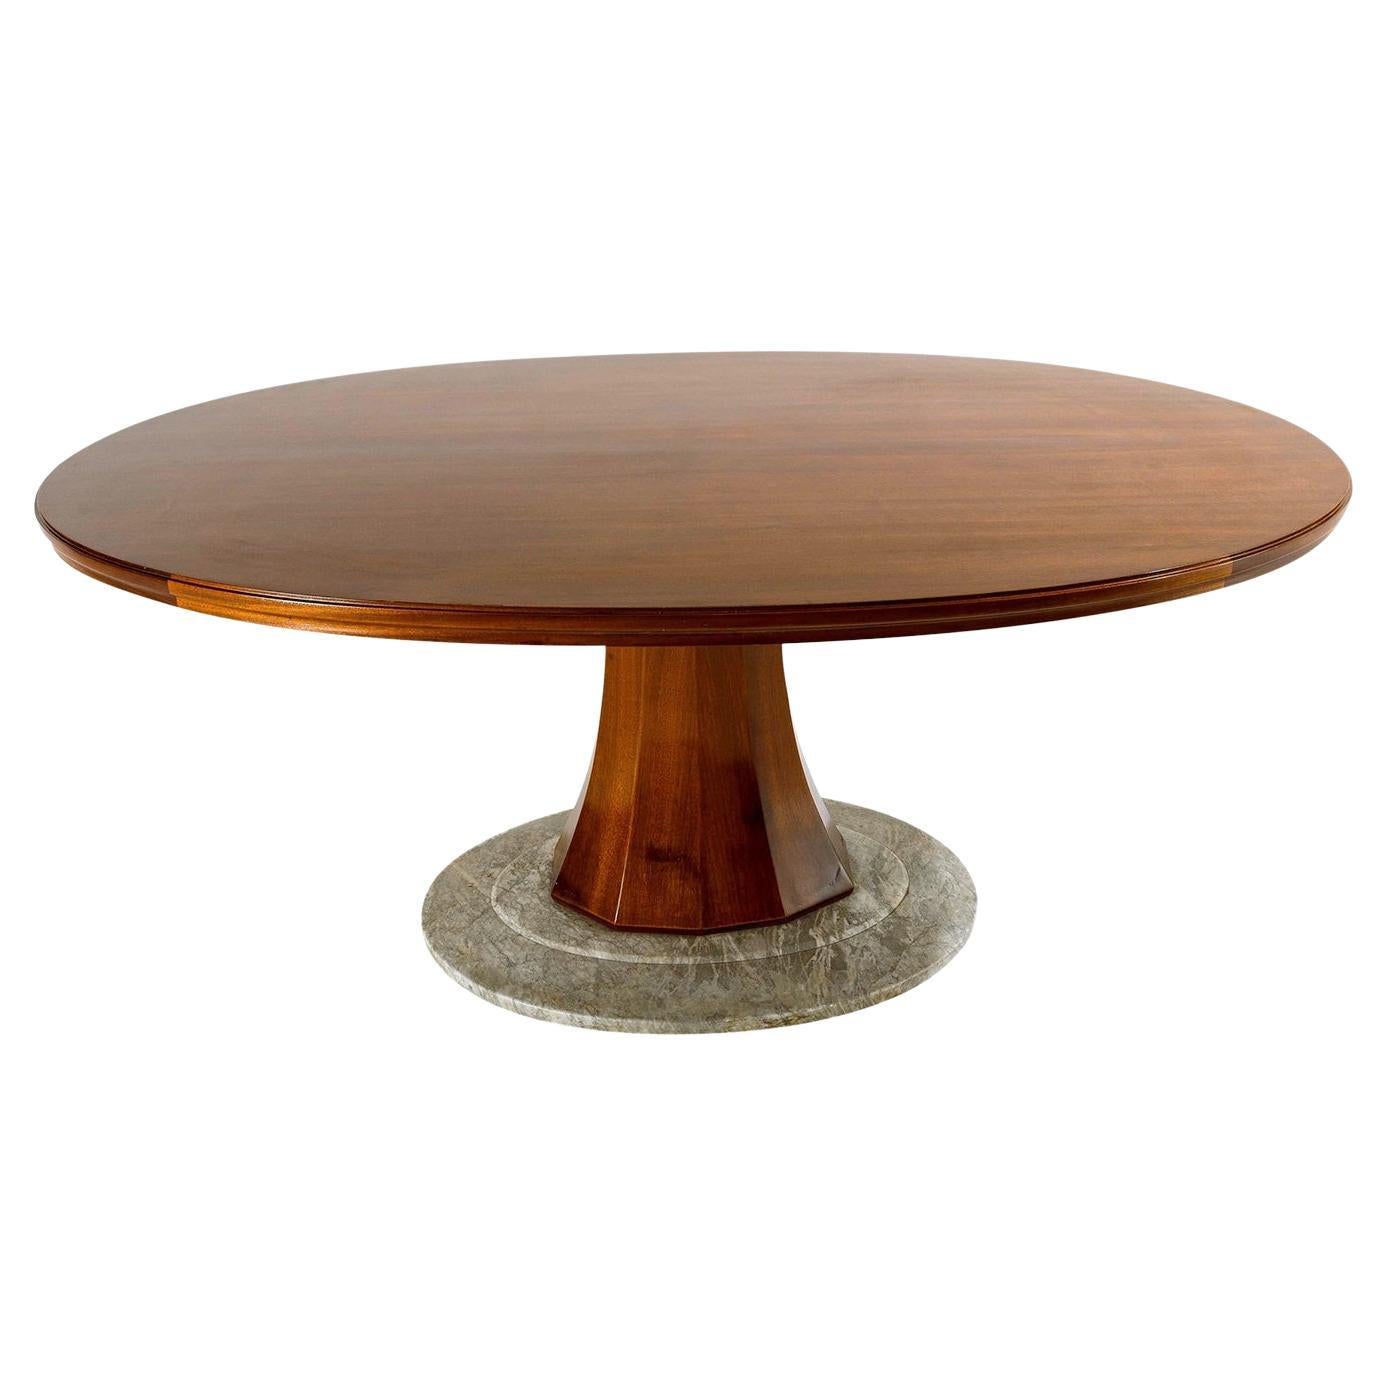 20th Century Italian Large Oval Rosewood, Marble Dining Table by Vittorio Dassi